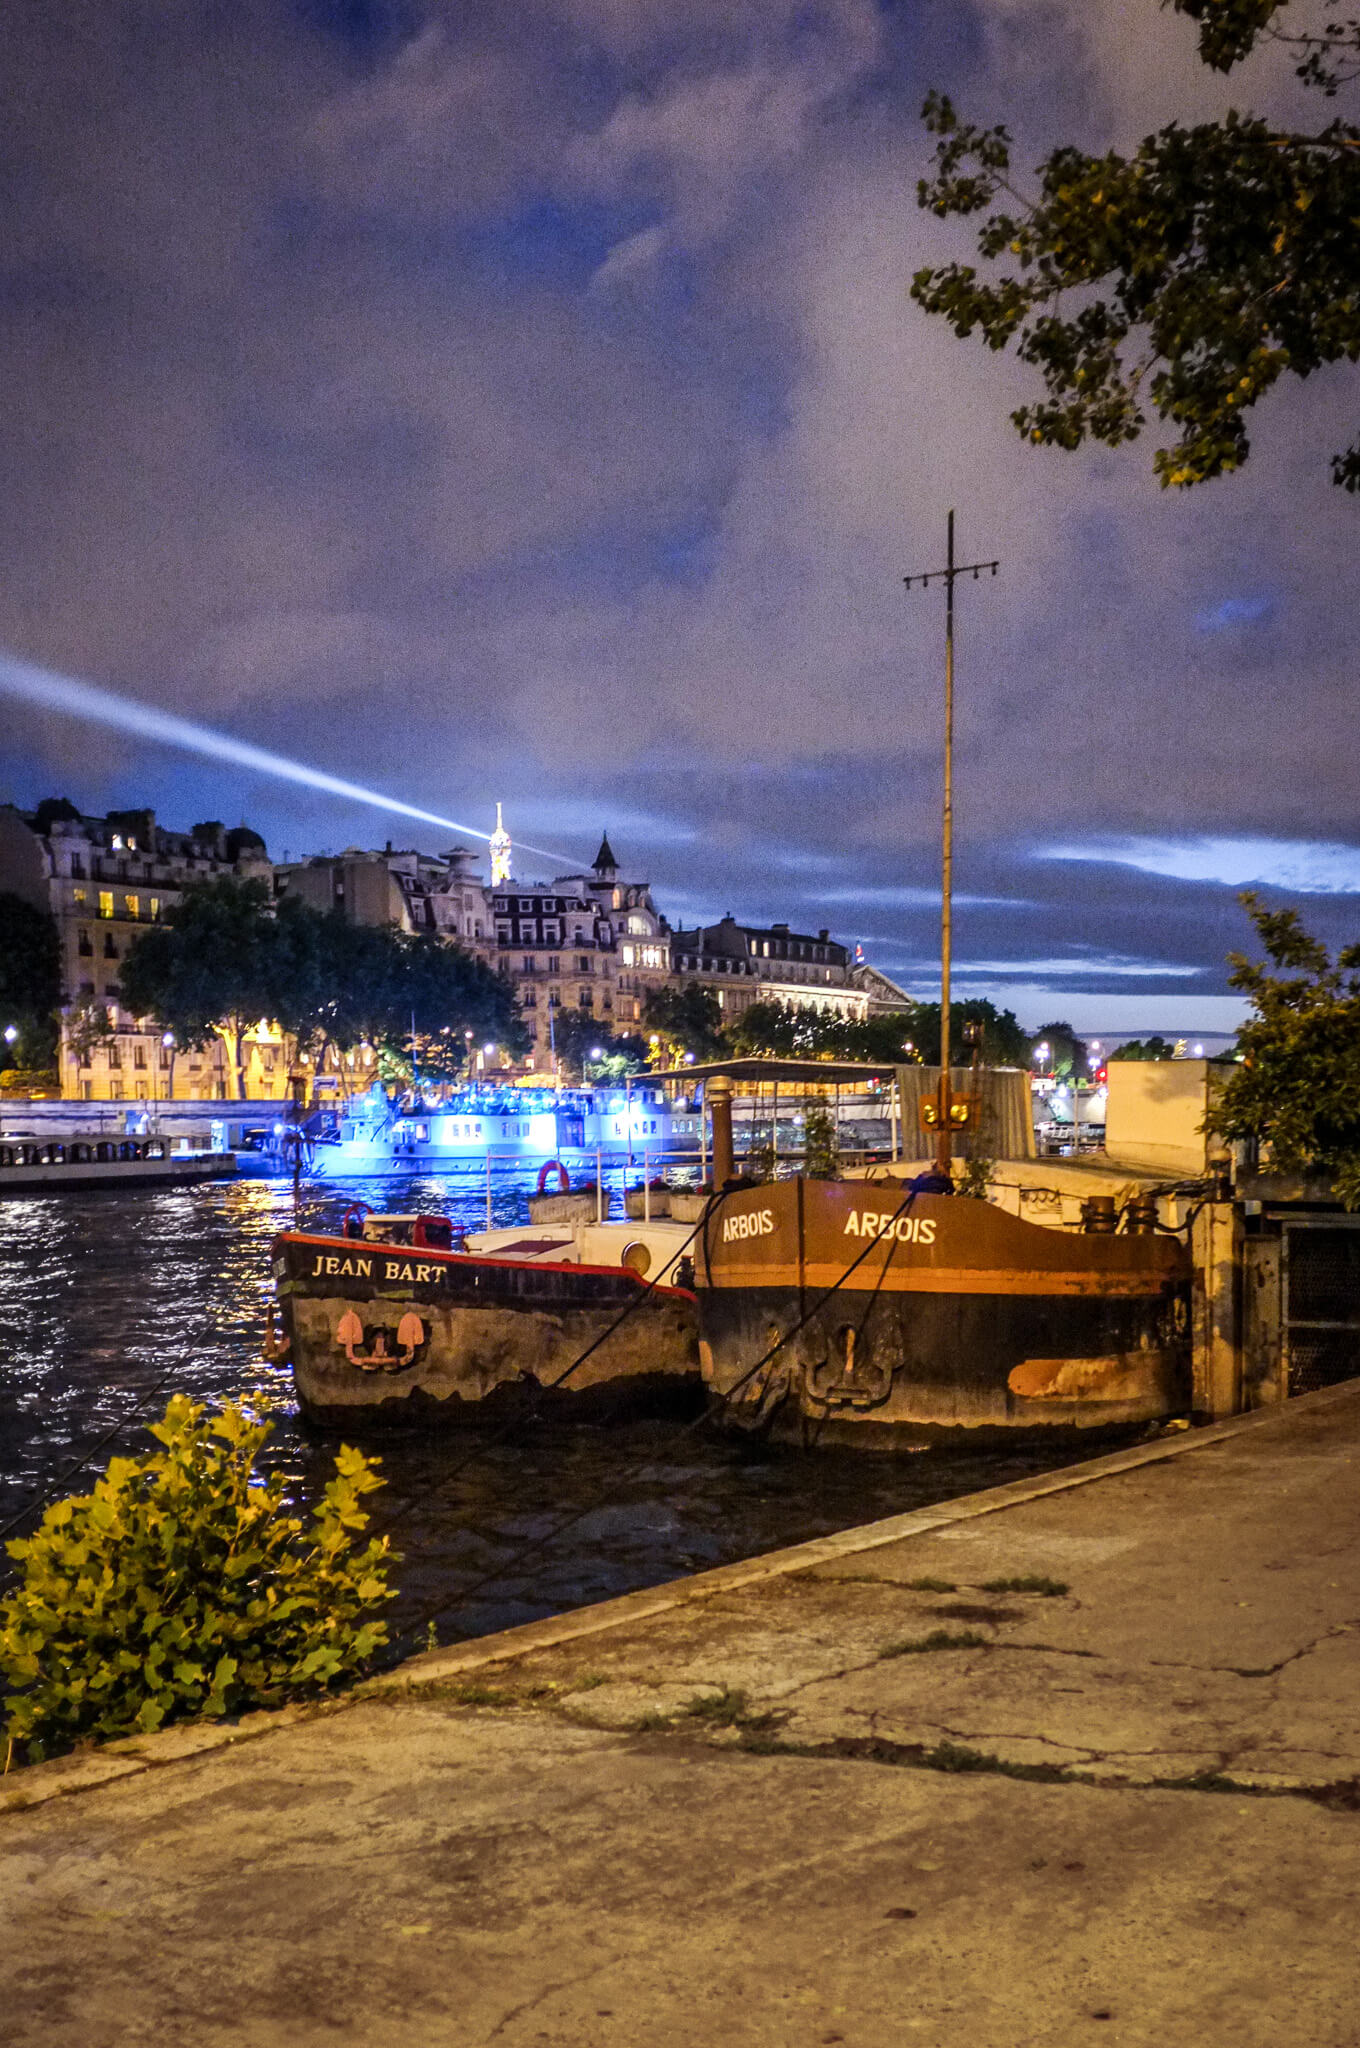 Seeing the spotlight from the Eiffel Tower at night at our houseboat on the Seine River in Paris